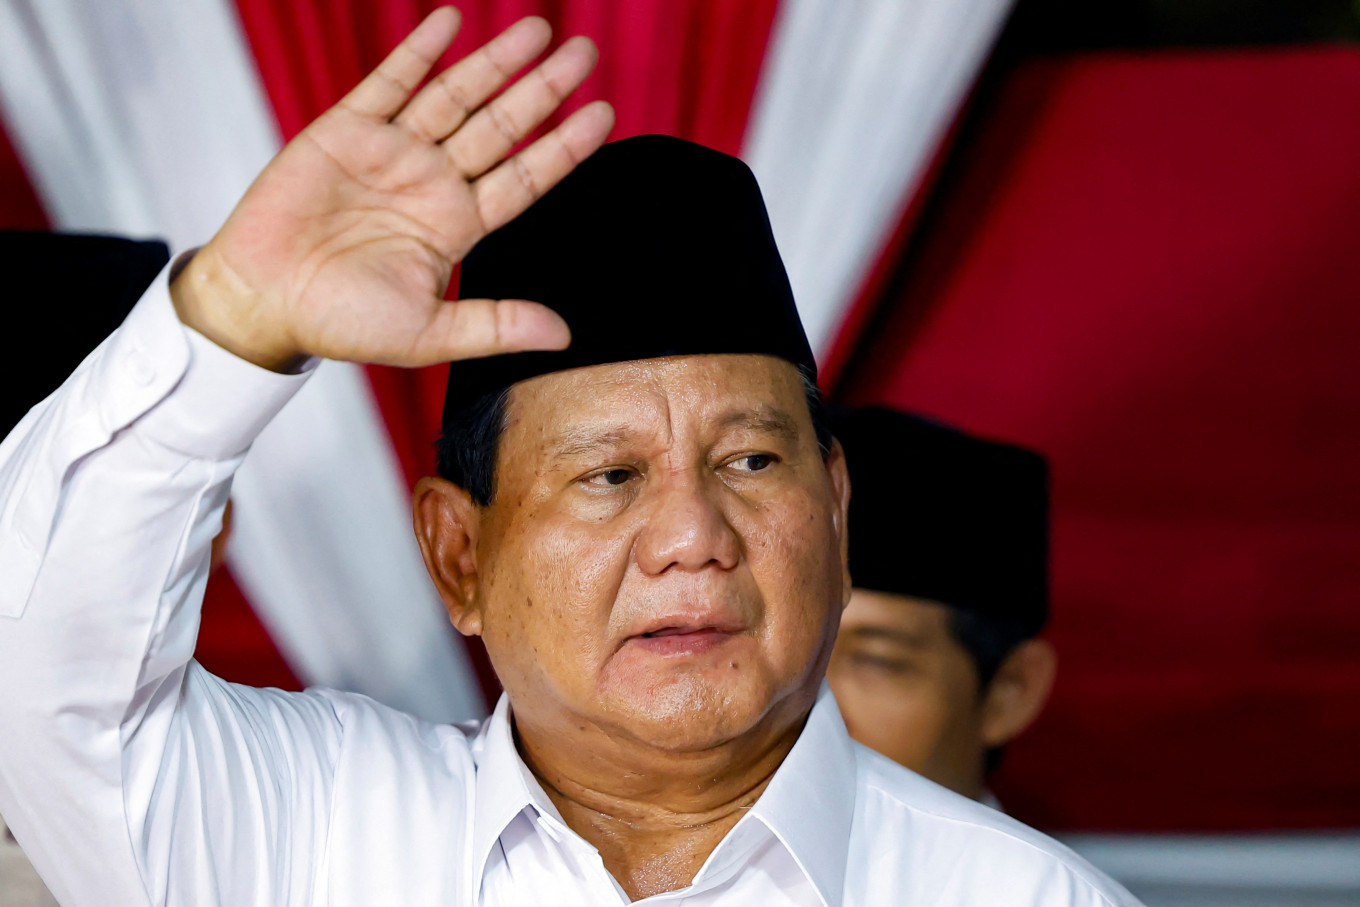 Indonesia’s Debt Financing on the Rise as Prabowo Subianto Promises More Spending: Will Fiscal Discipline be Compromised?